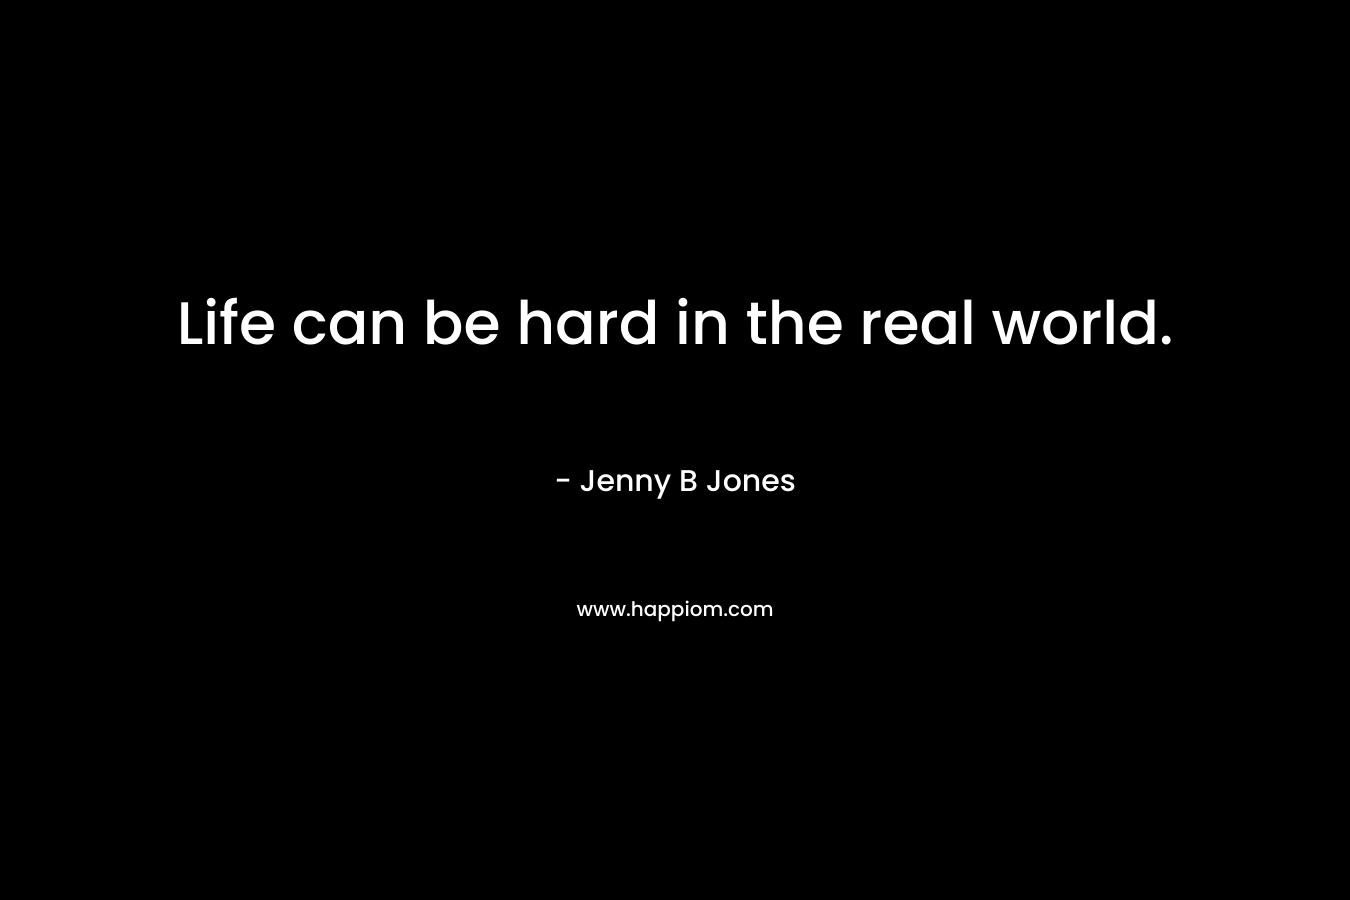 Life can be hard in the real world. – Jenny B Jones